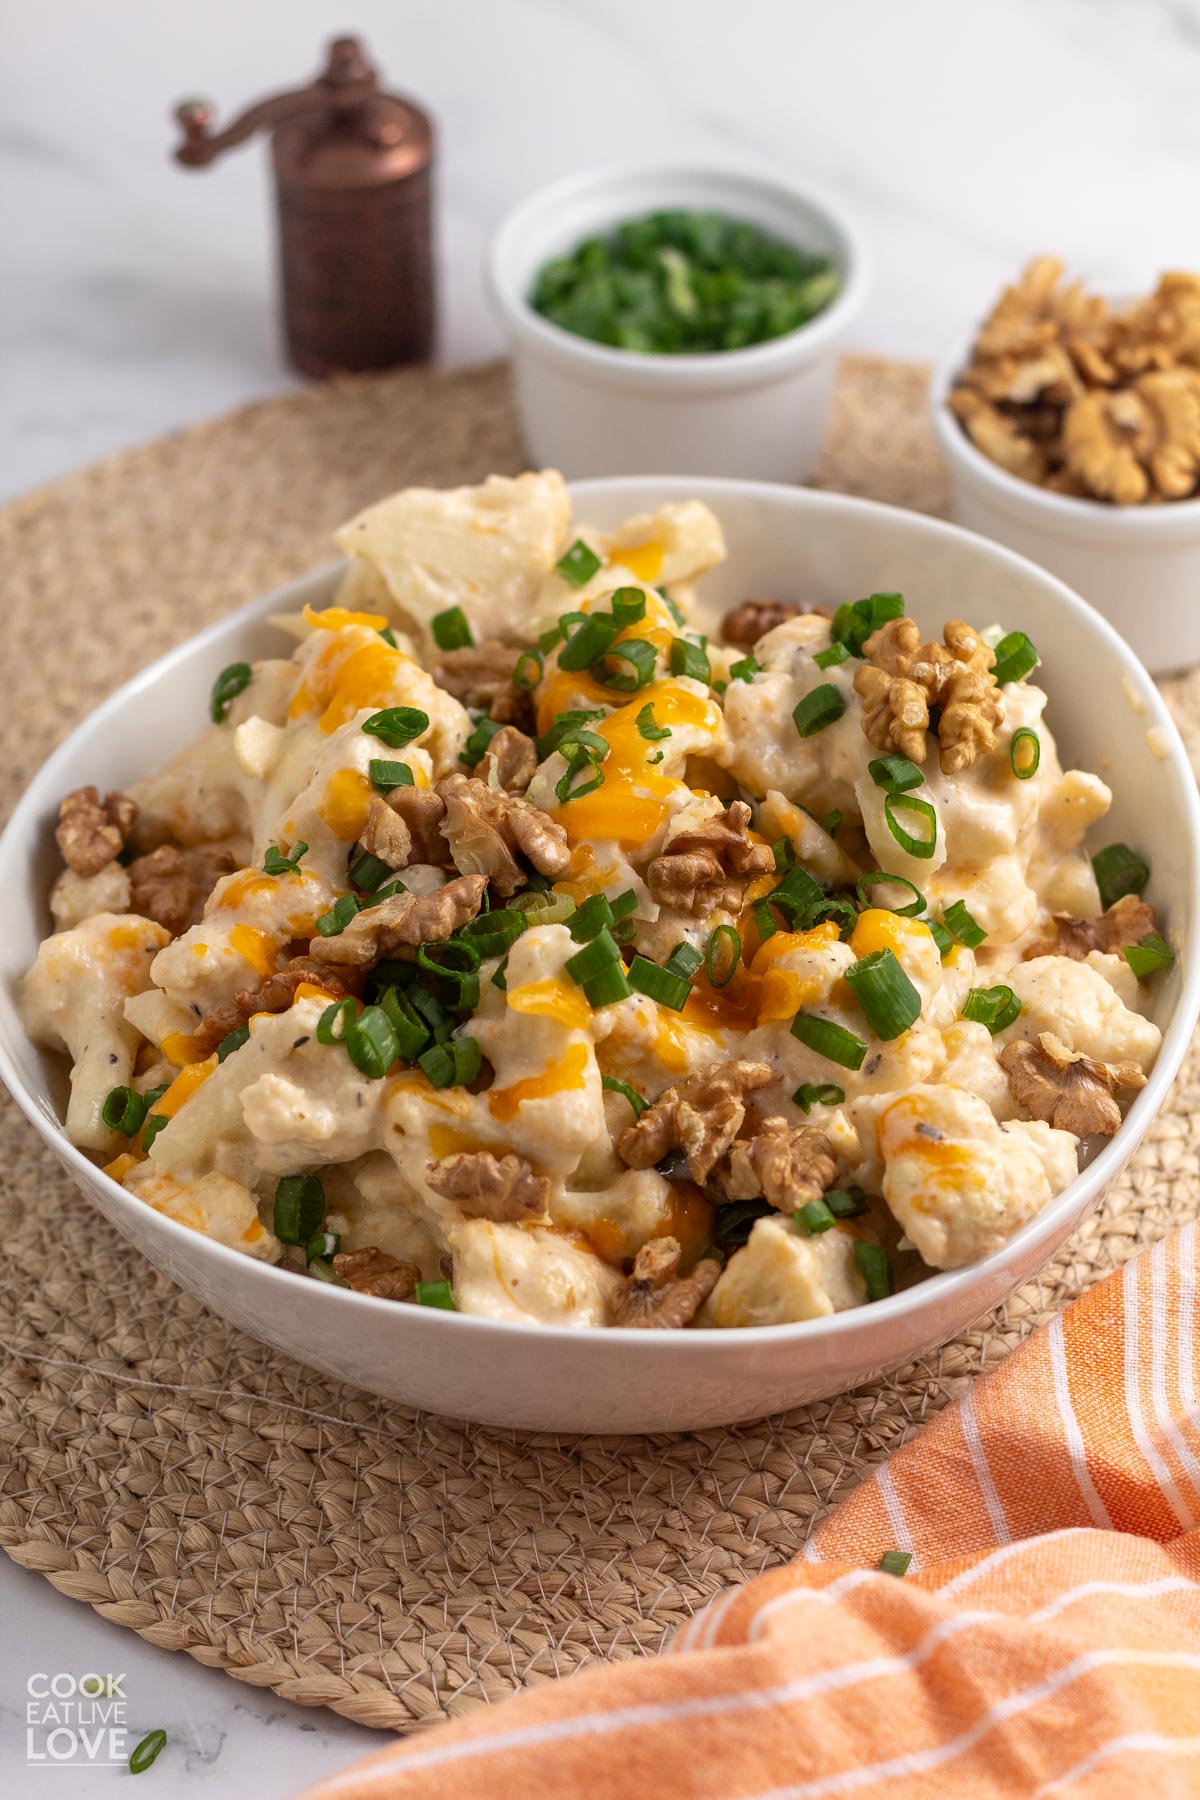 crockpot cauliflower casserole garnished with walnuts and green onions in a white bowl with small bowls of the garnishes behind it.